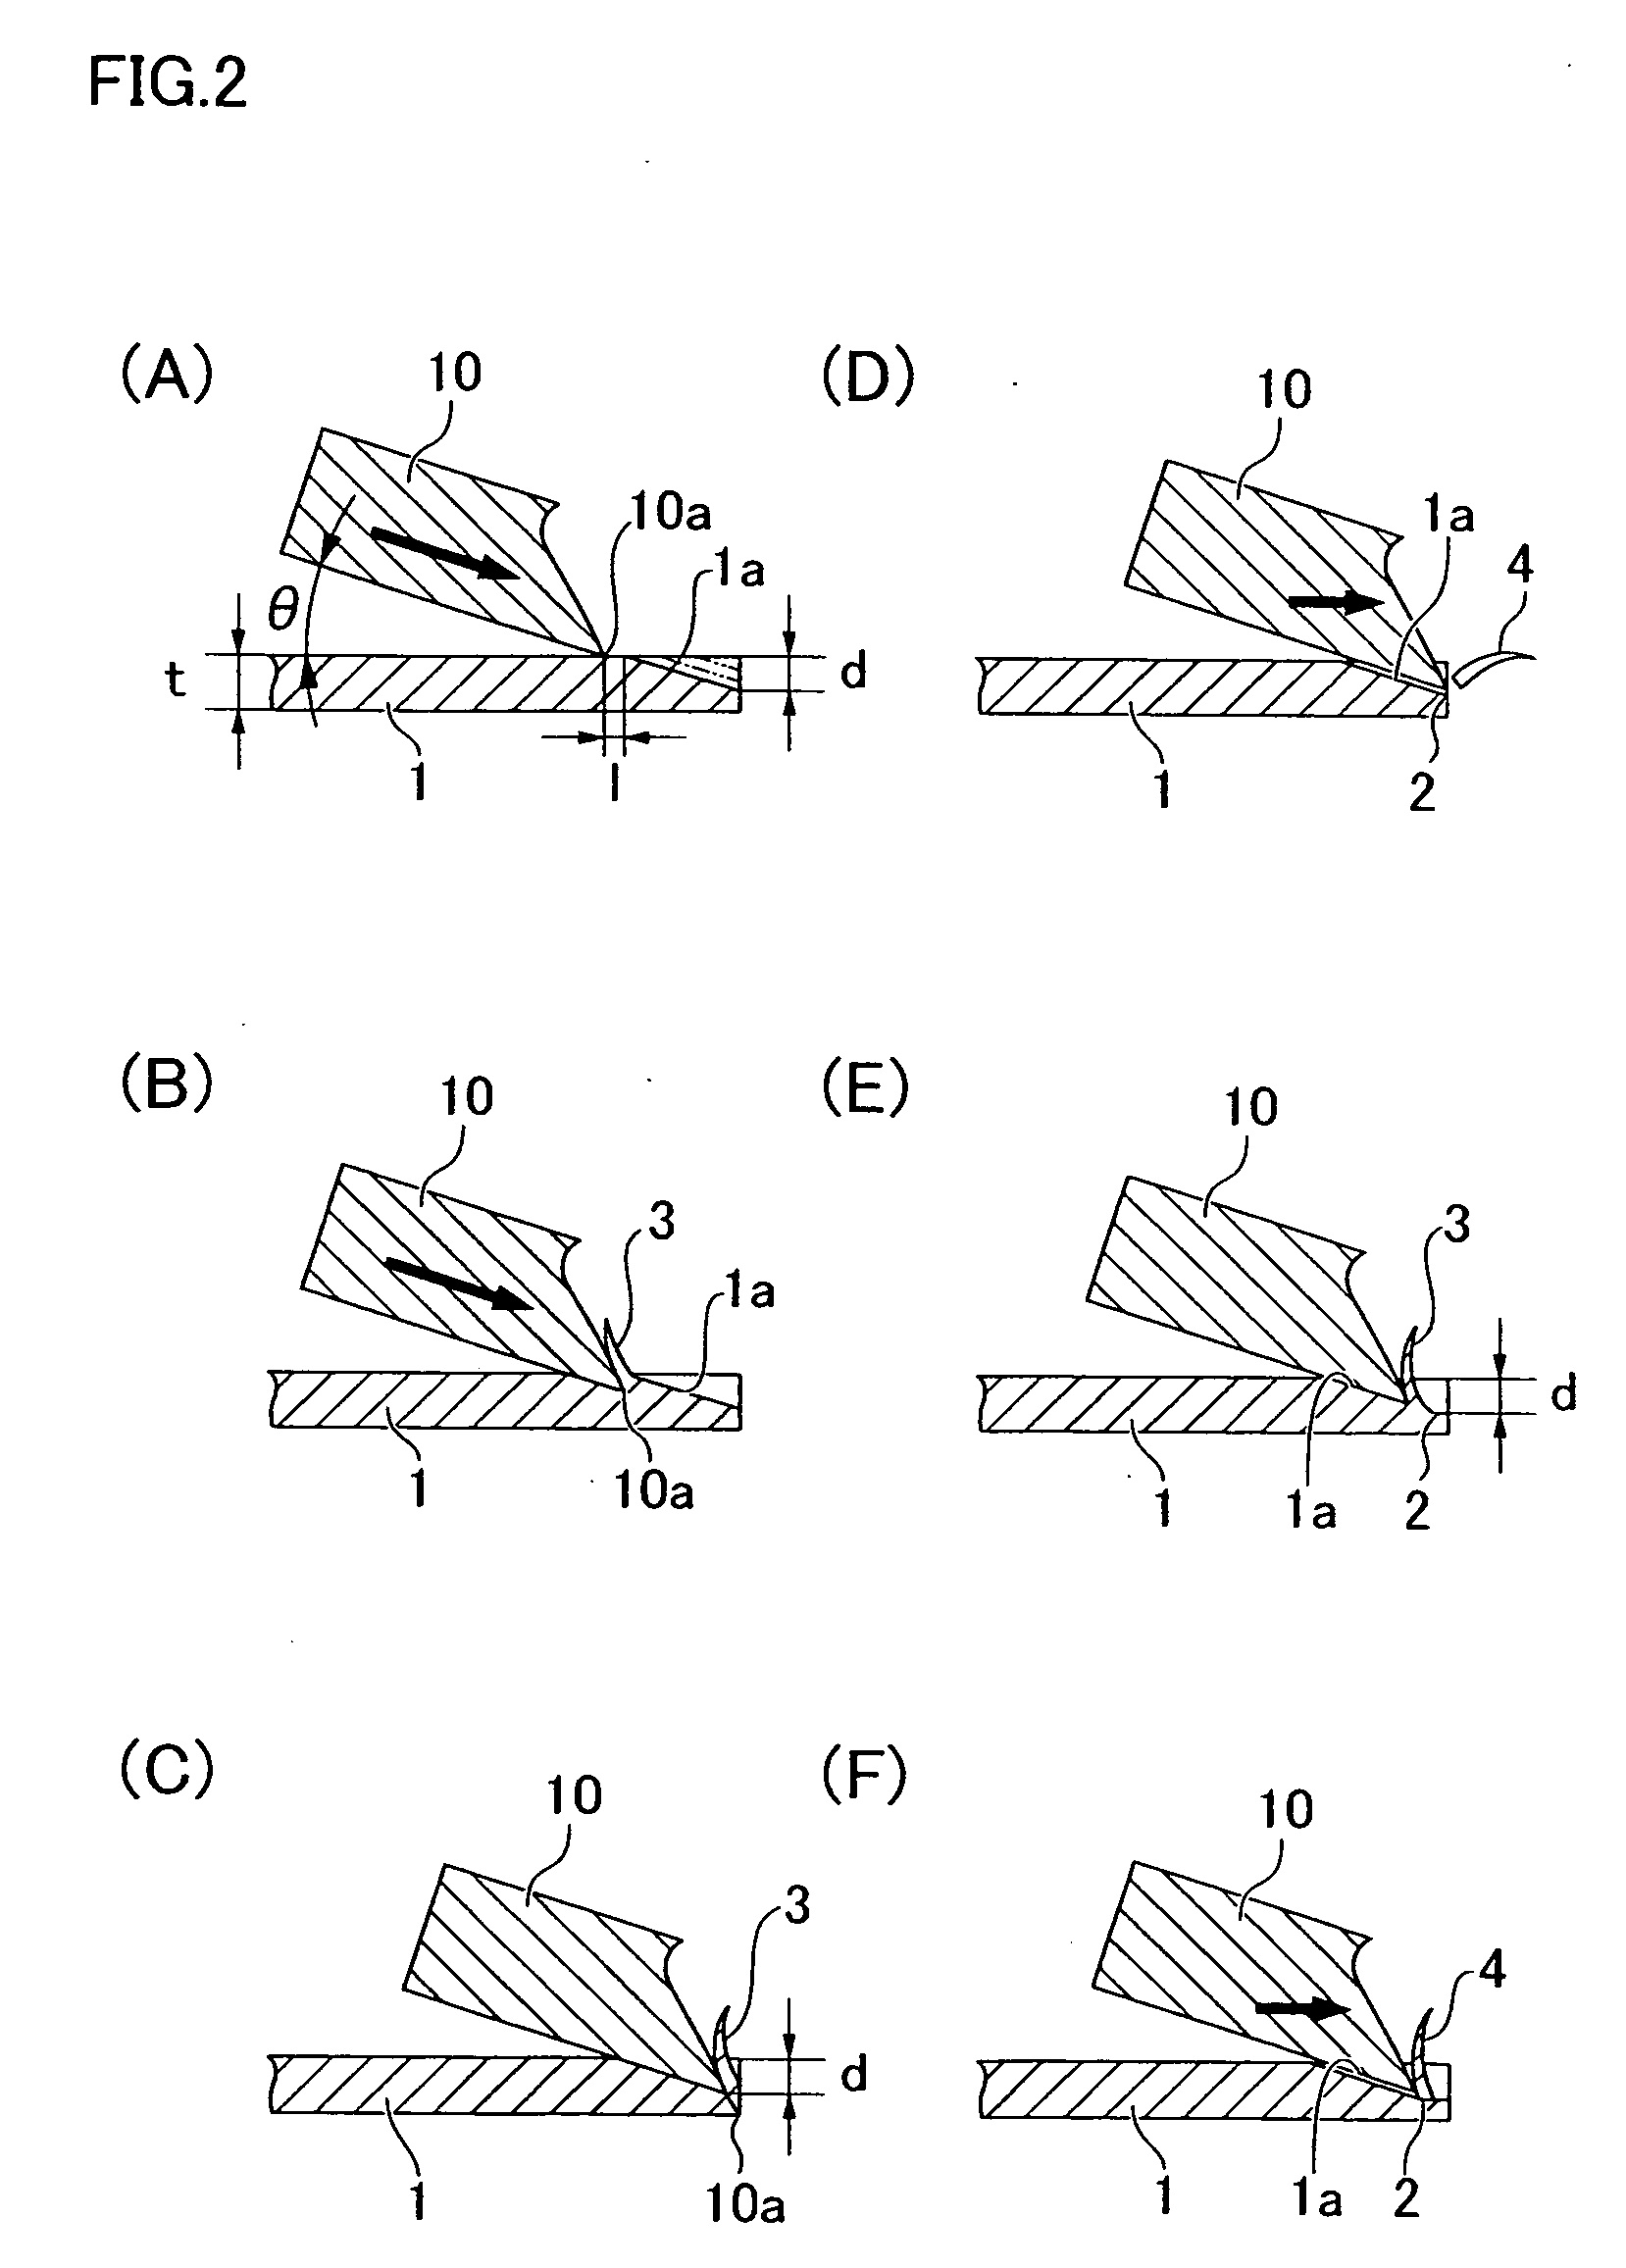 Method of forming a recess in a work